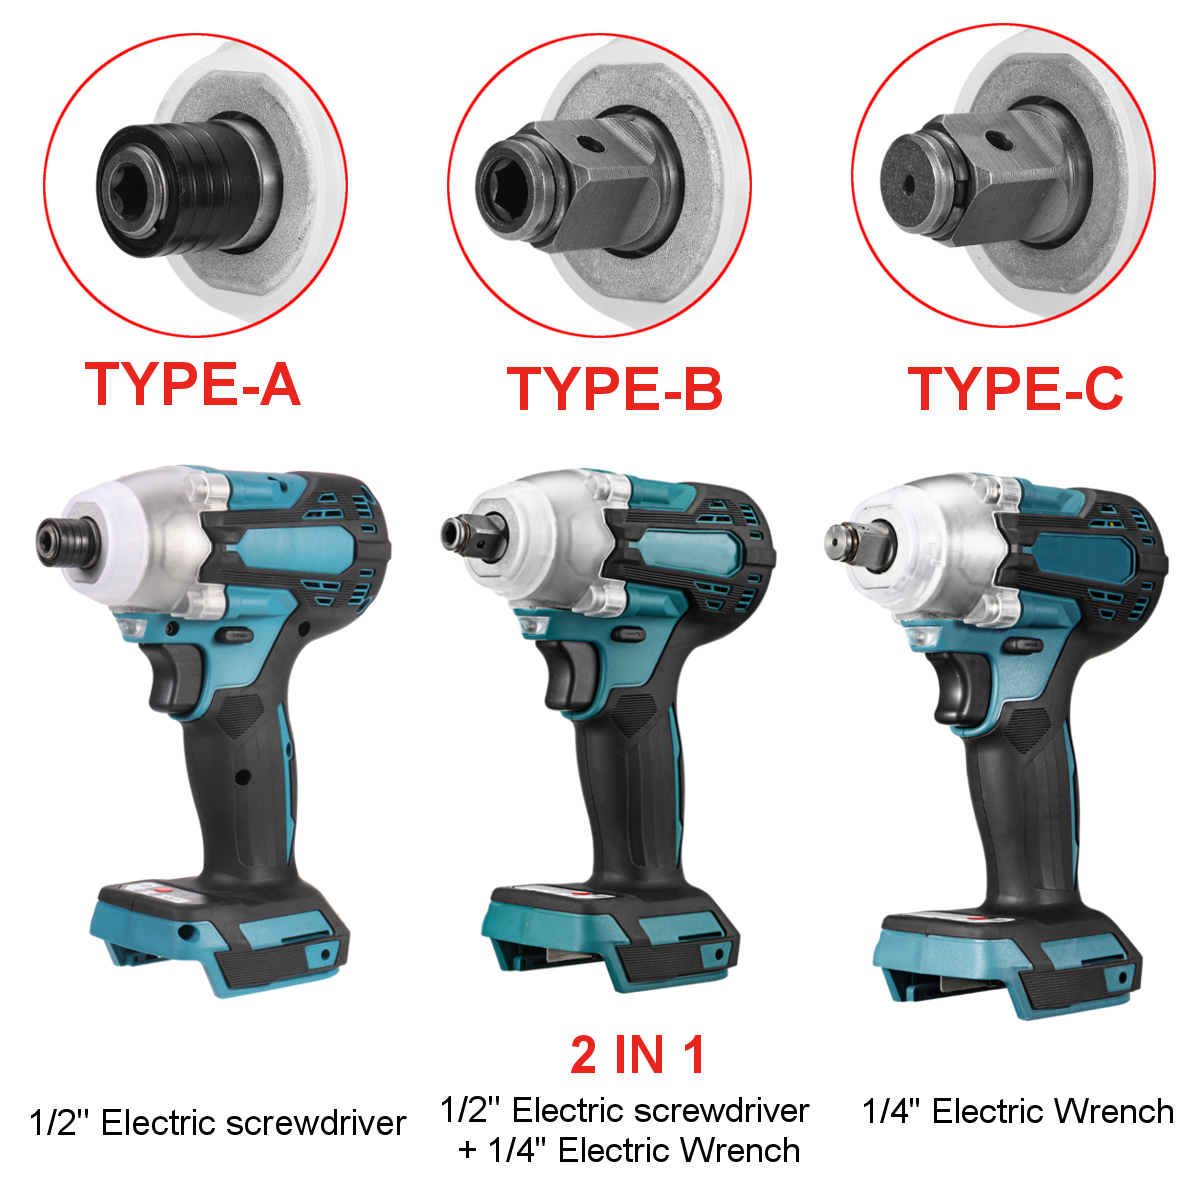 DTW300-2-in1-18V-800Nm-Li-Ion-Brushless-Cordless-12quot-Electric-Wrench-14quotScrewdriver-Drill-Repl-1854869-7